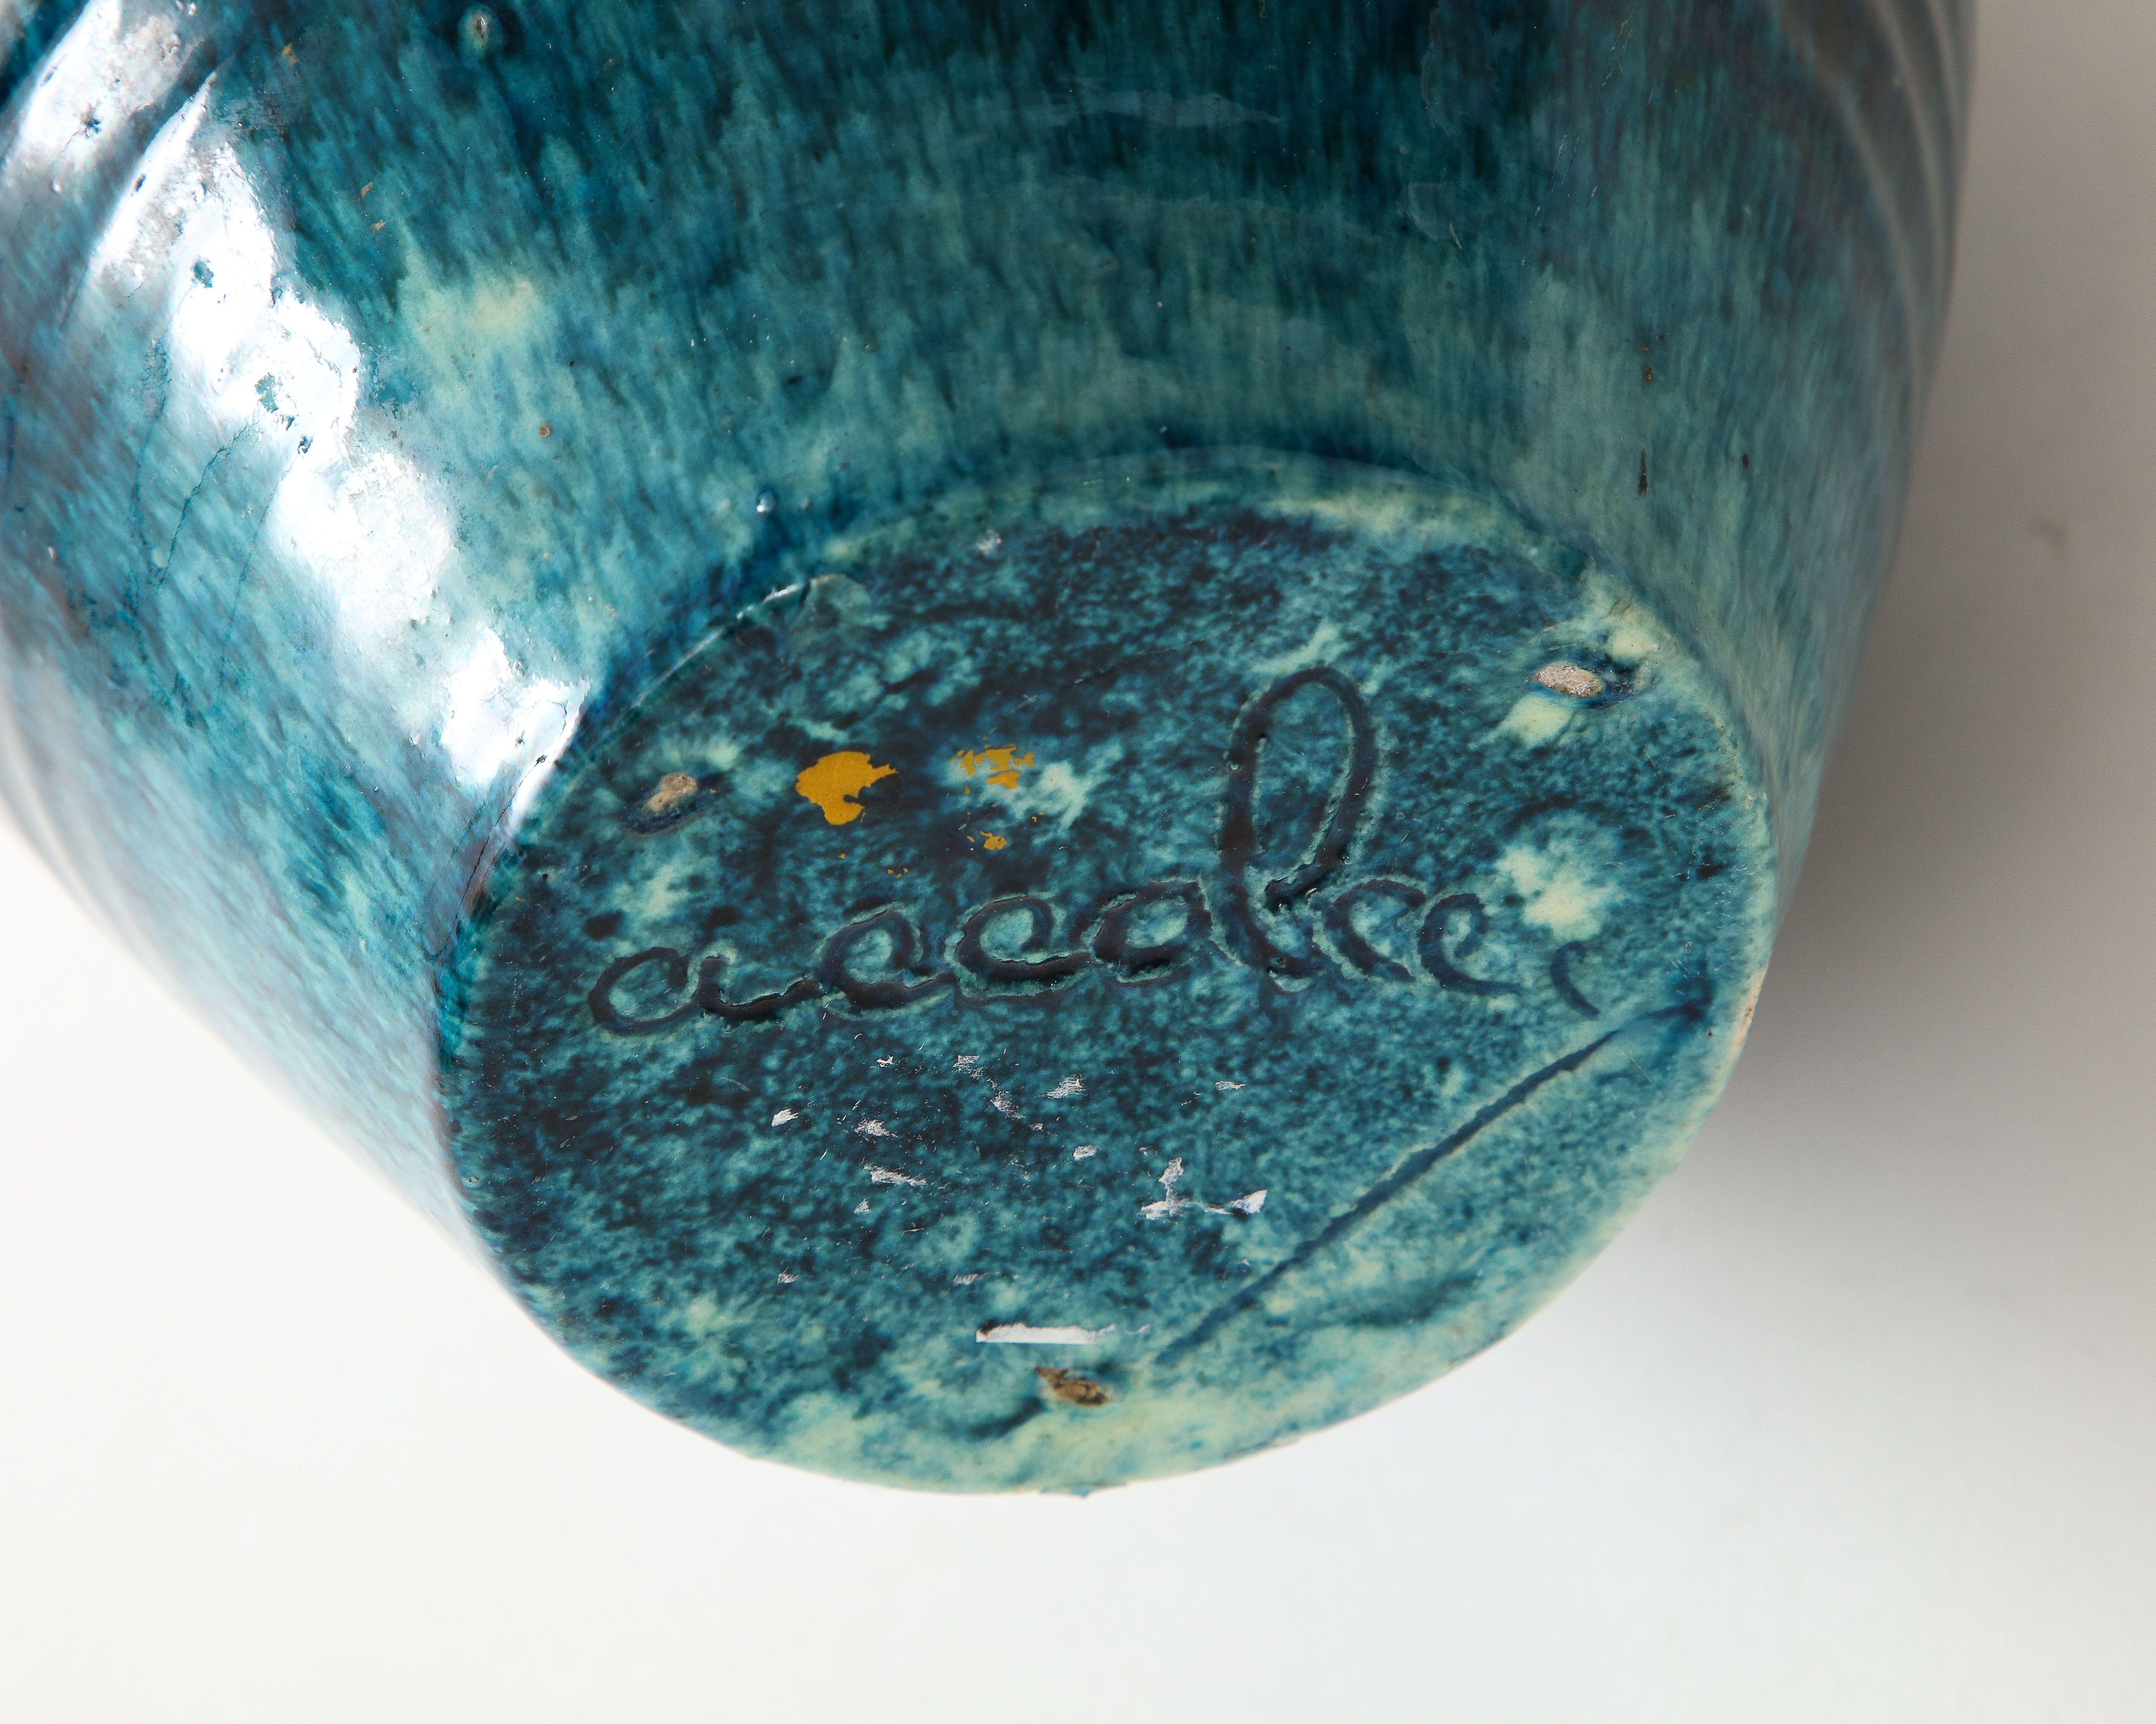 A ceramic vase in a beautiful glaze of blue and brown produced by Accolay Pottery. Founded in the 1950s in Accolay, France, the Accolay studio became well known after it produced buttons for the collection of Christian Dior. One of several pieces of